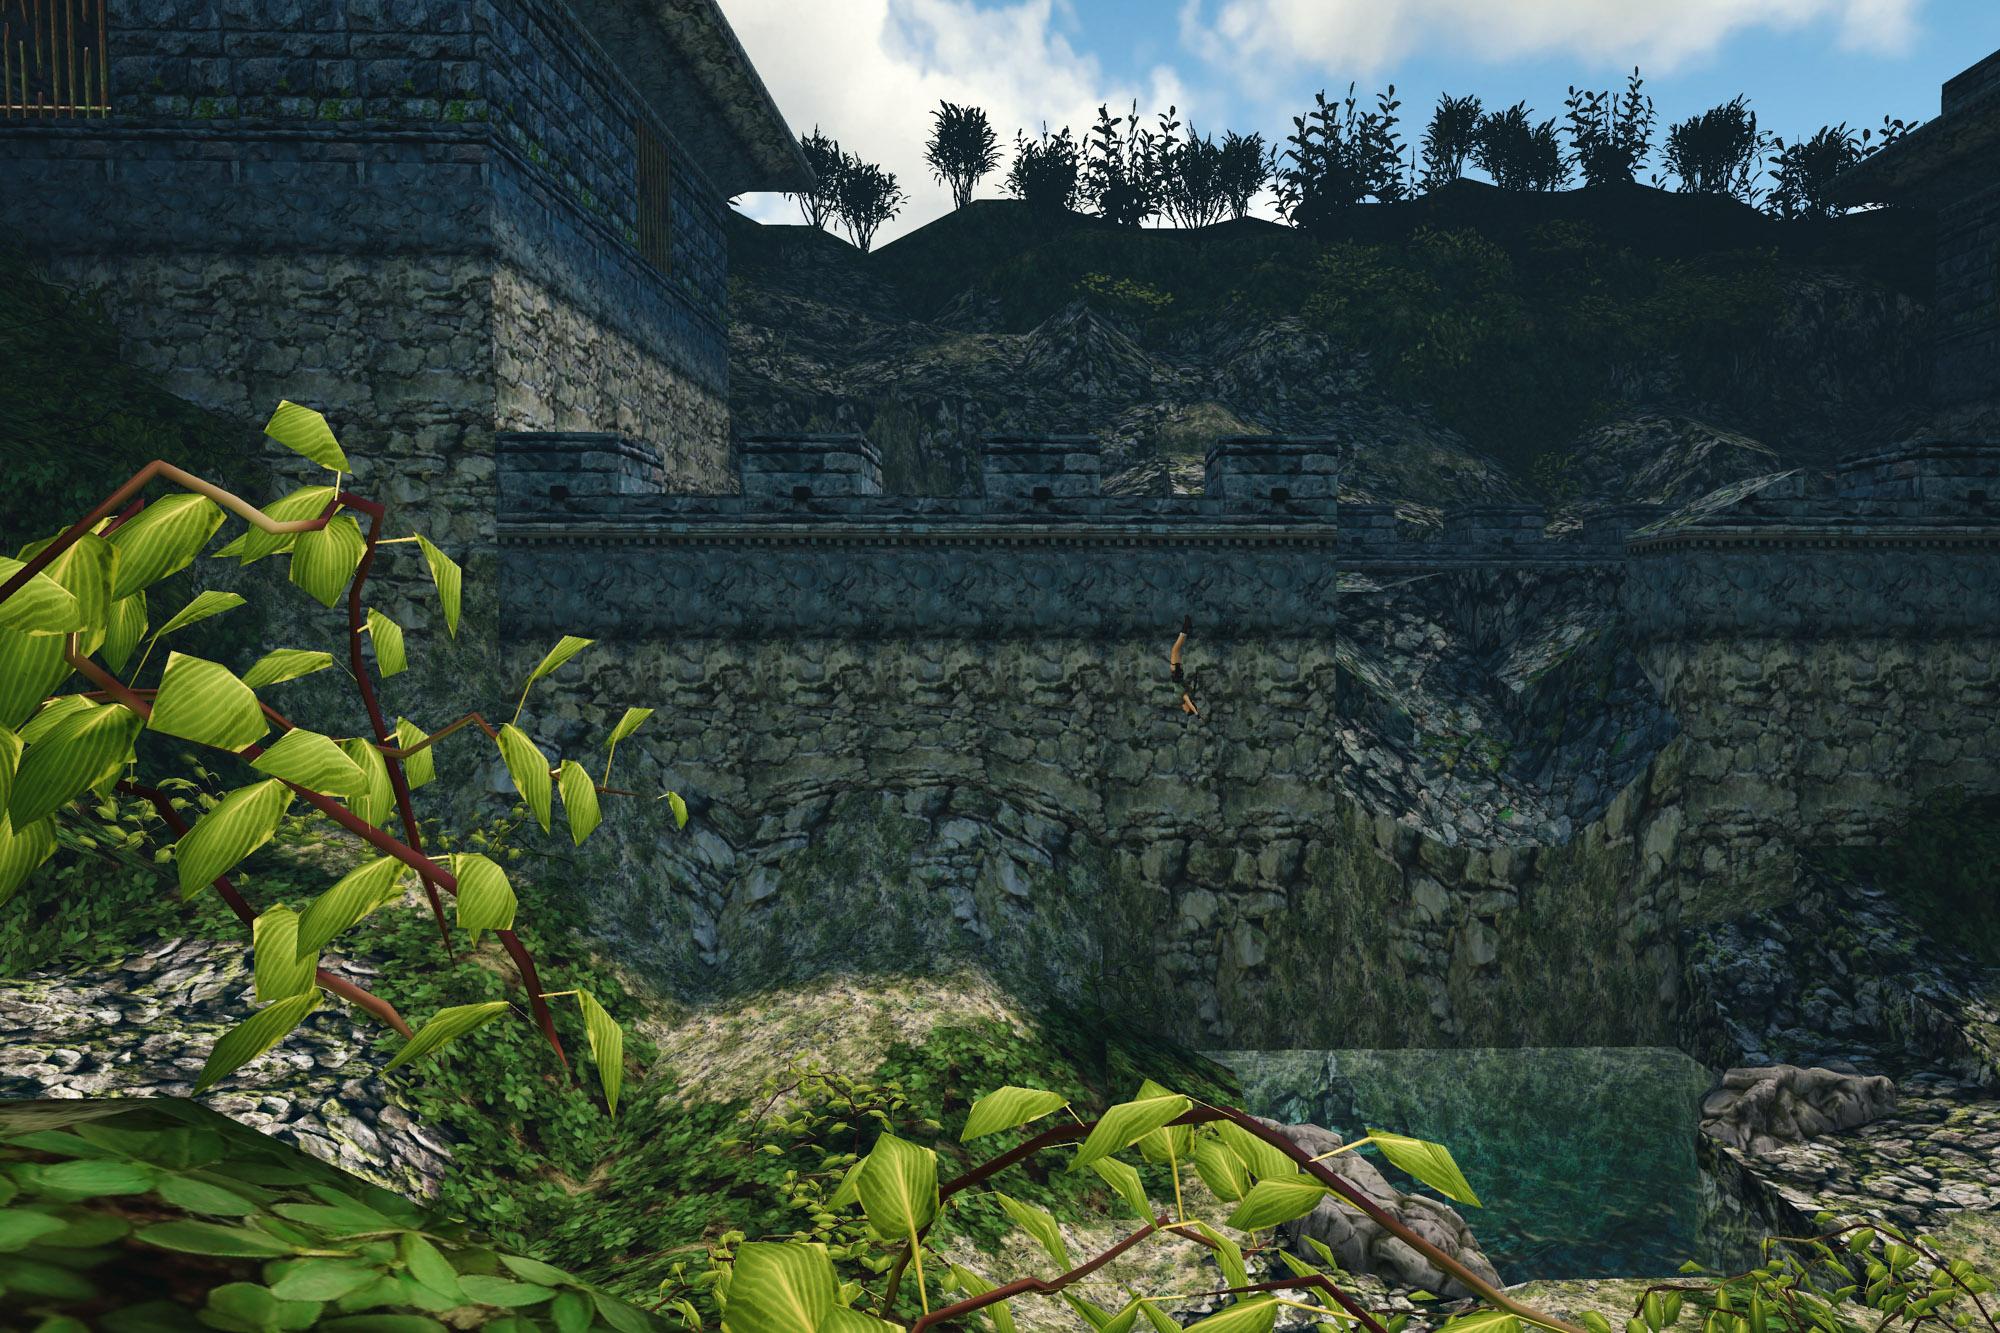 Lara Croft swandiving from the top of a Great Wall guardhouse into a lake.